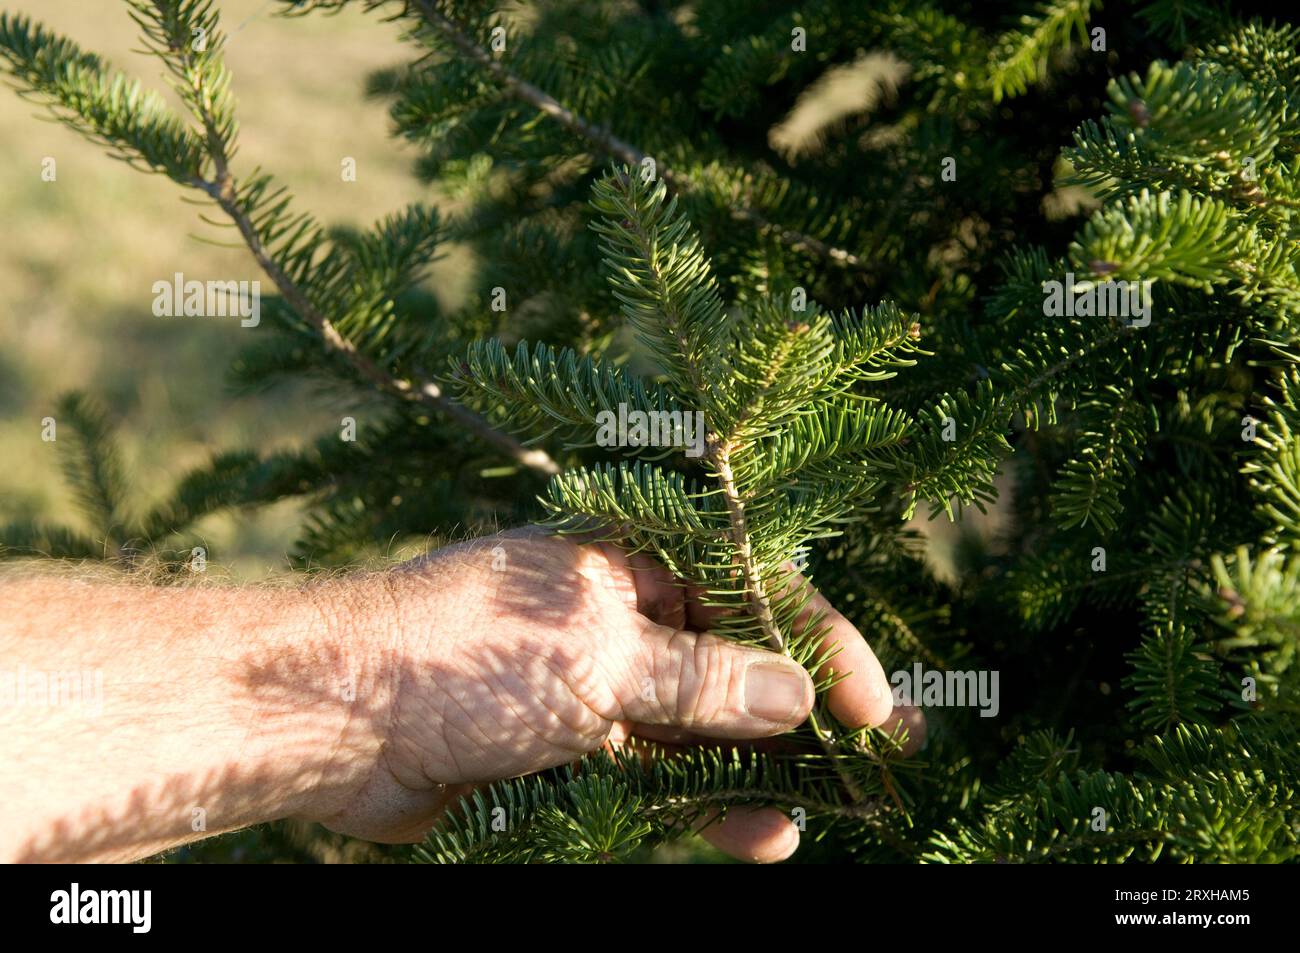 Man's hand holding a branch of a Canaan fir tree (Abies balsamea var. phanerolepis) at a tree farm; Blue Hill, Nebraska, United States of America Stock Photo